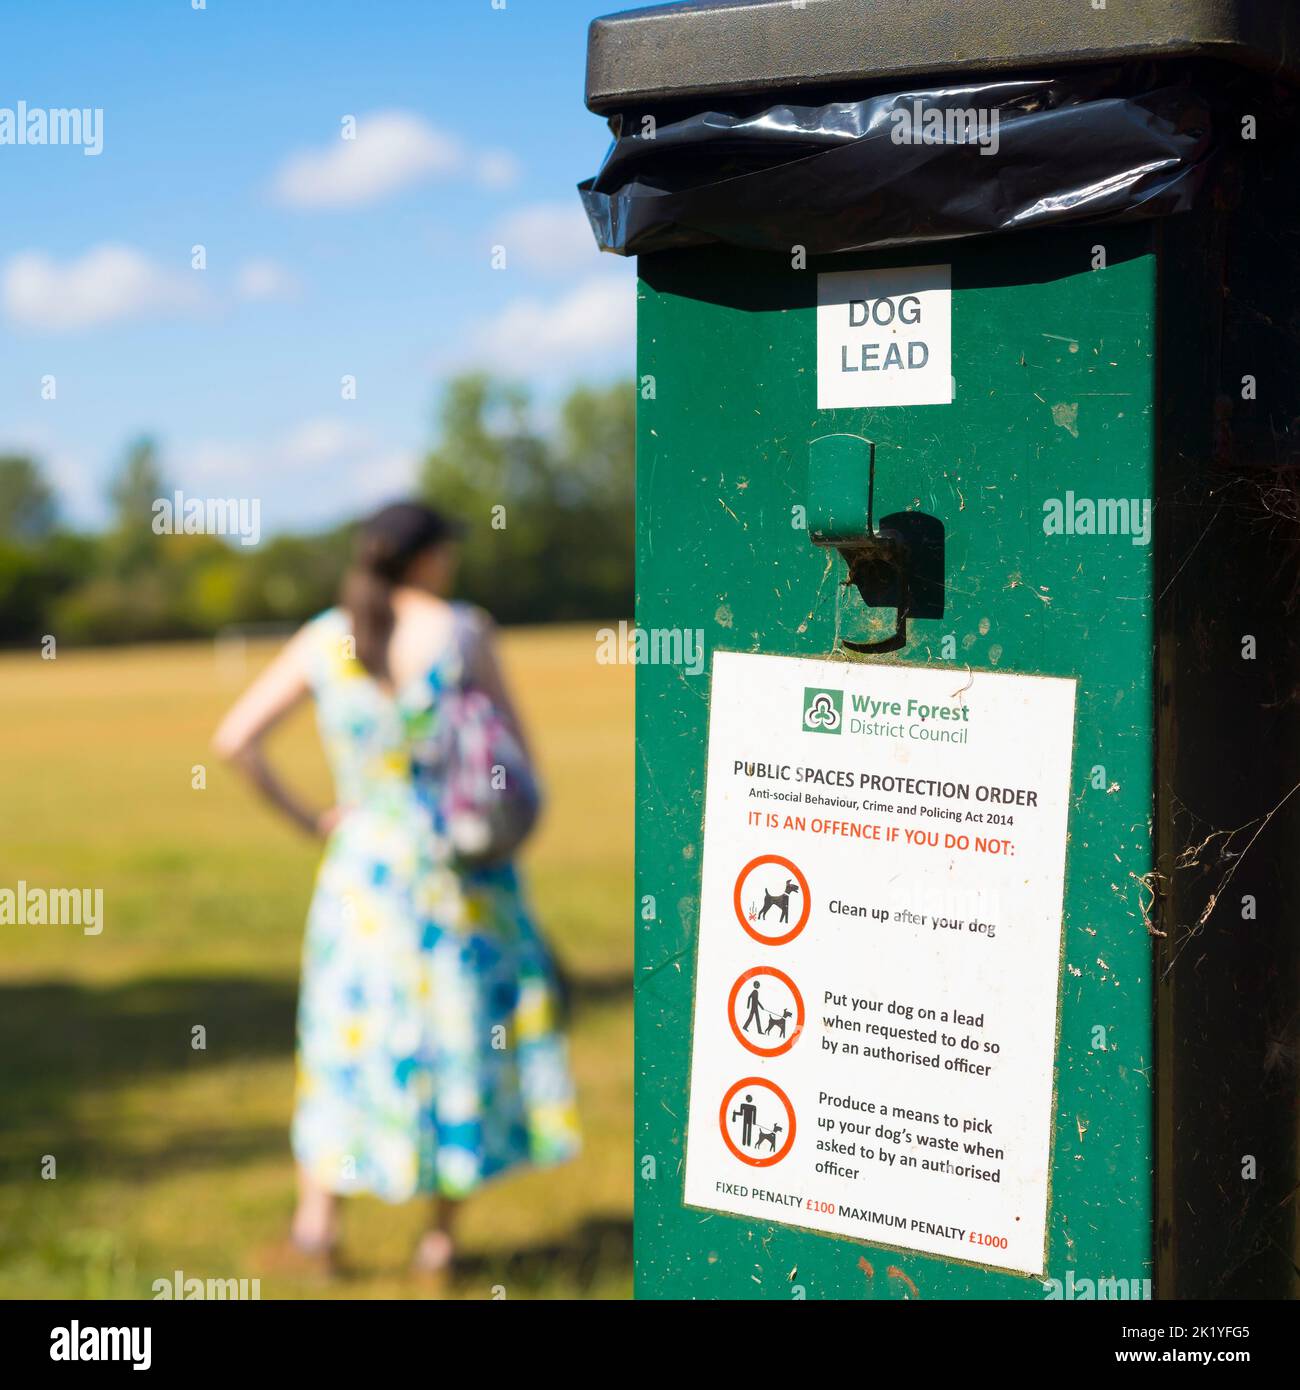 Public Spaces Protection Order issued by Wyre Forest District Council stuck to a dog waste bin in a public park. Instructions to dog owners. Stock Photo